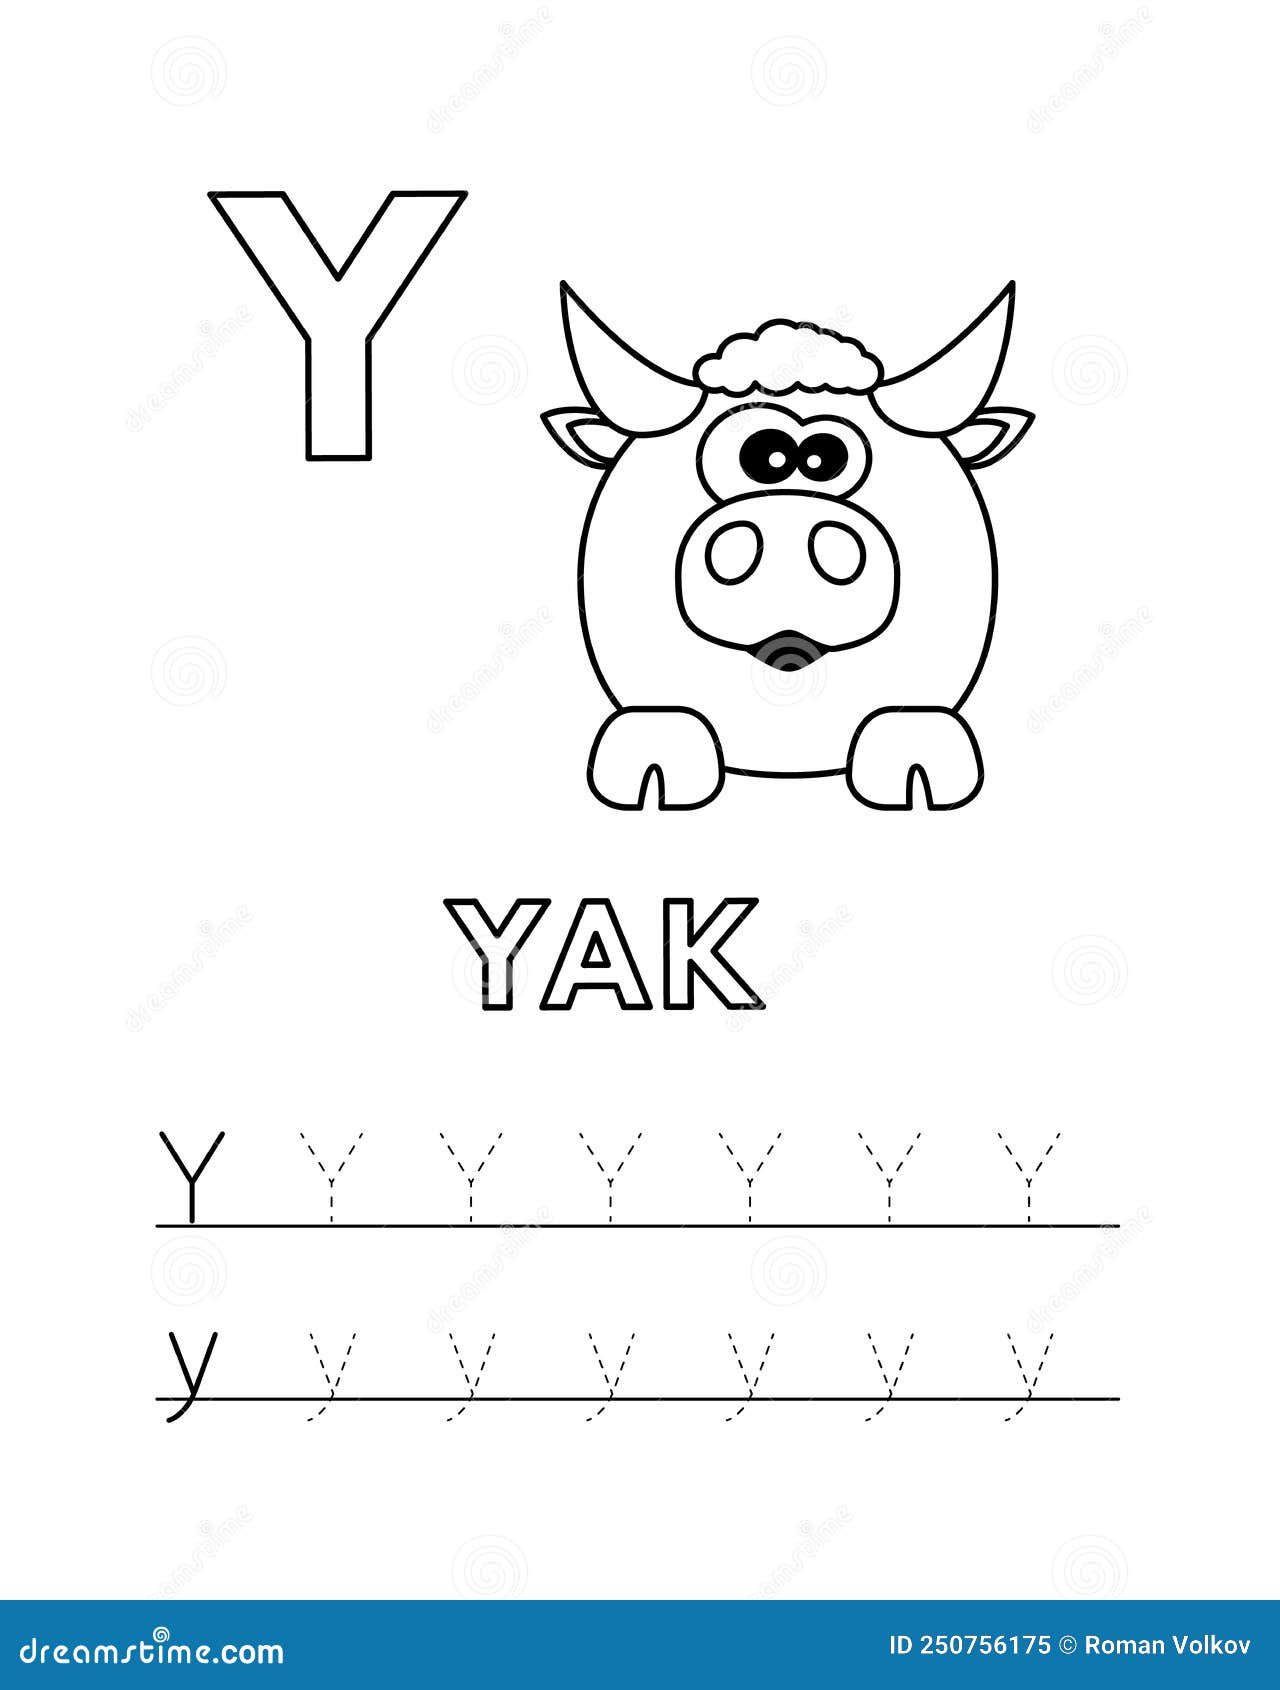 Tracing letter y stock illustrations â tracing letter y stock illustrations vectors clipart